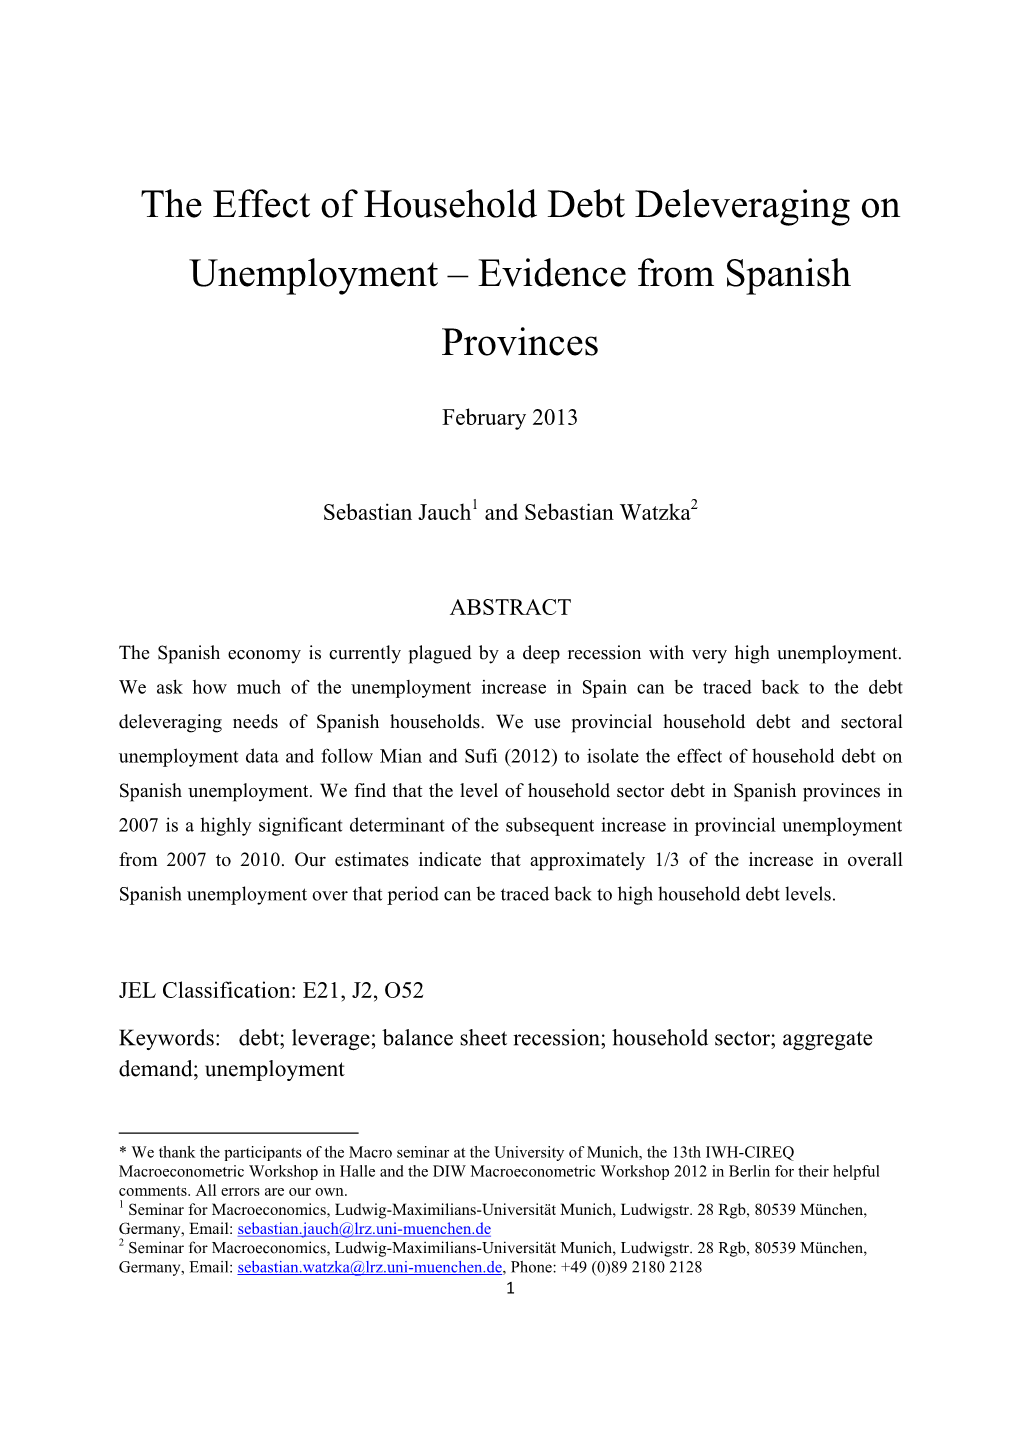 The Effect of Household Debt Deleveraging on Unemployment – Evidence from Spanish Provinces